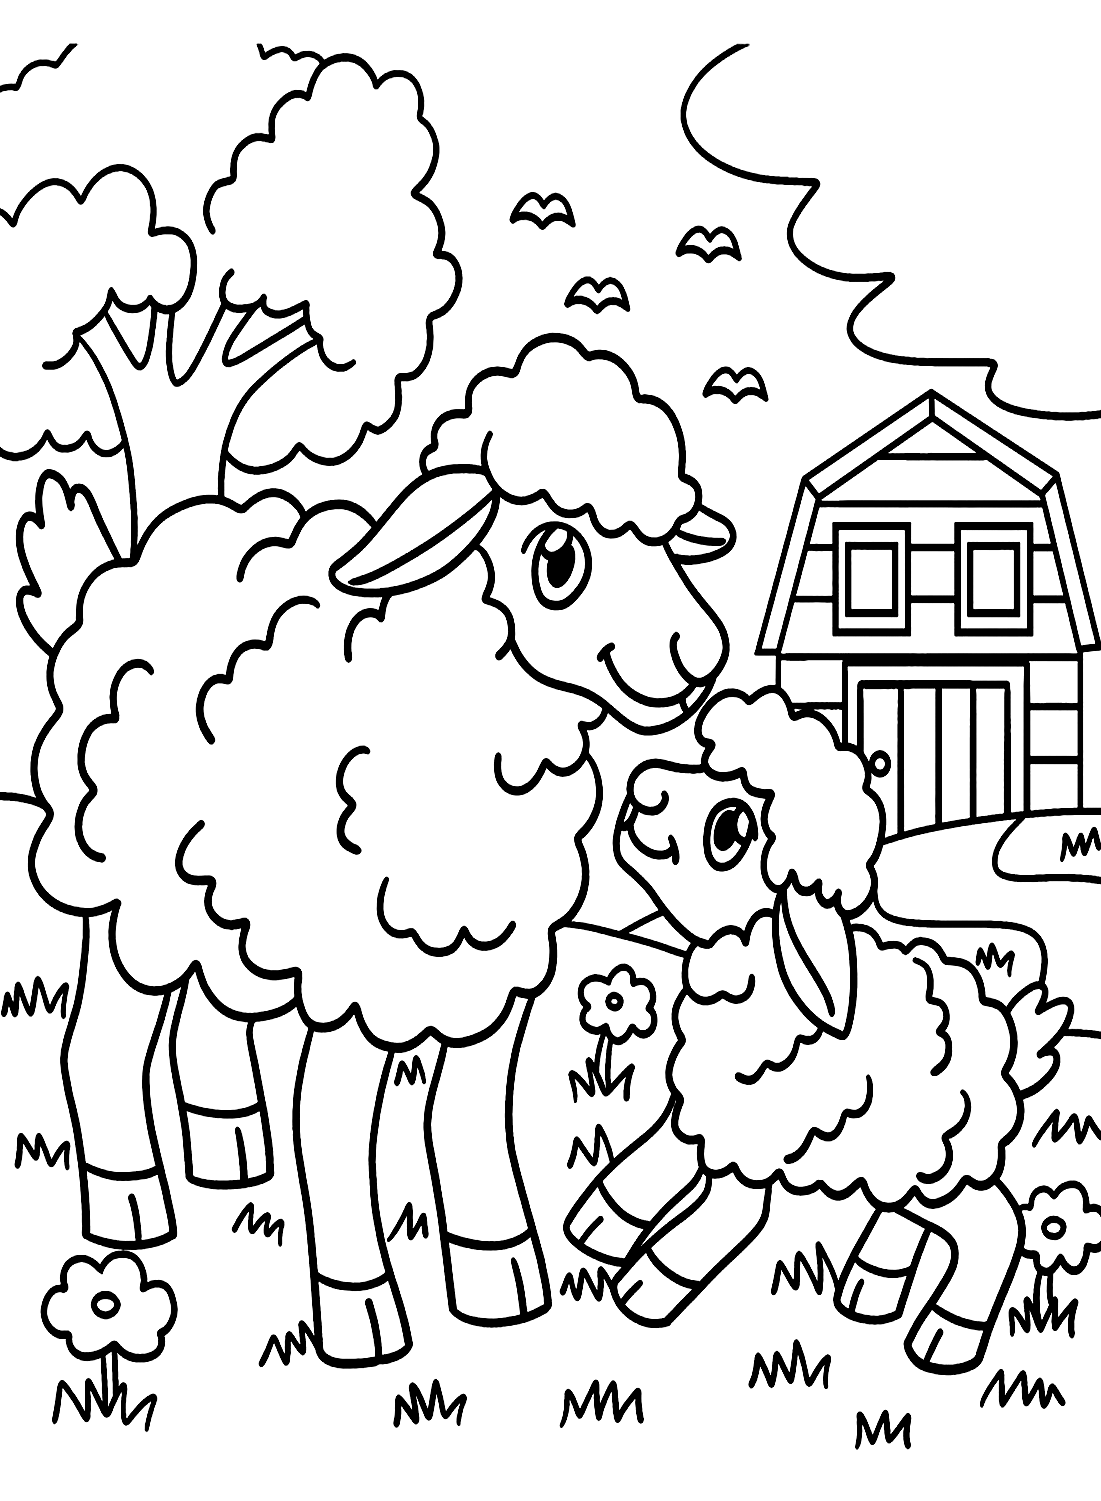 Mom Sheep and Baby Sheep Color Picture